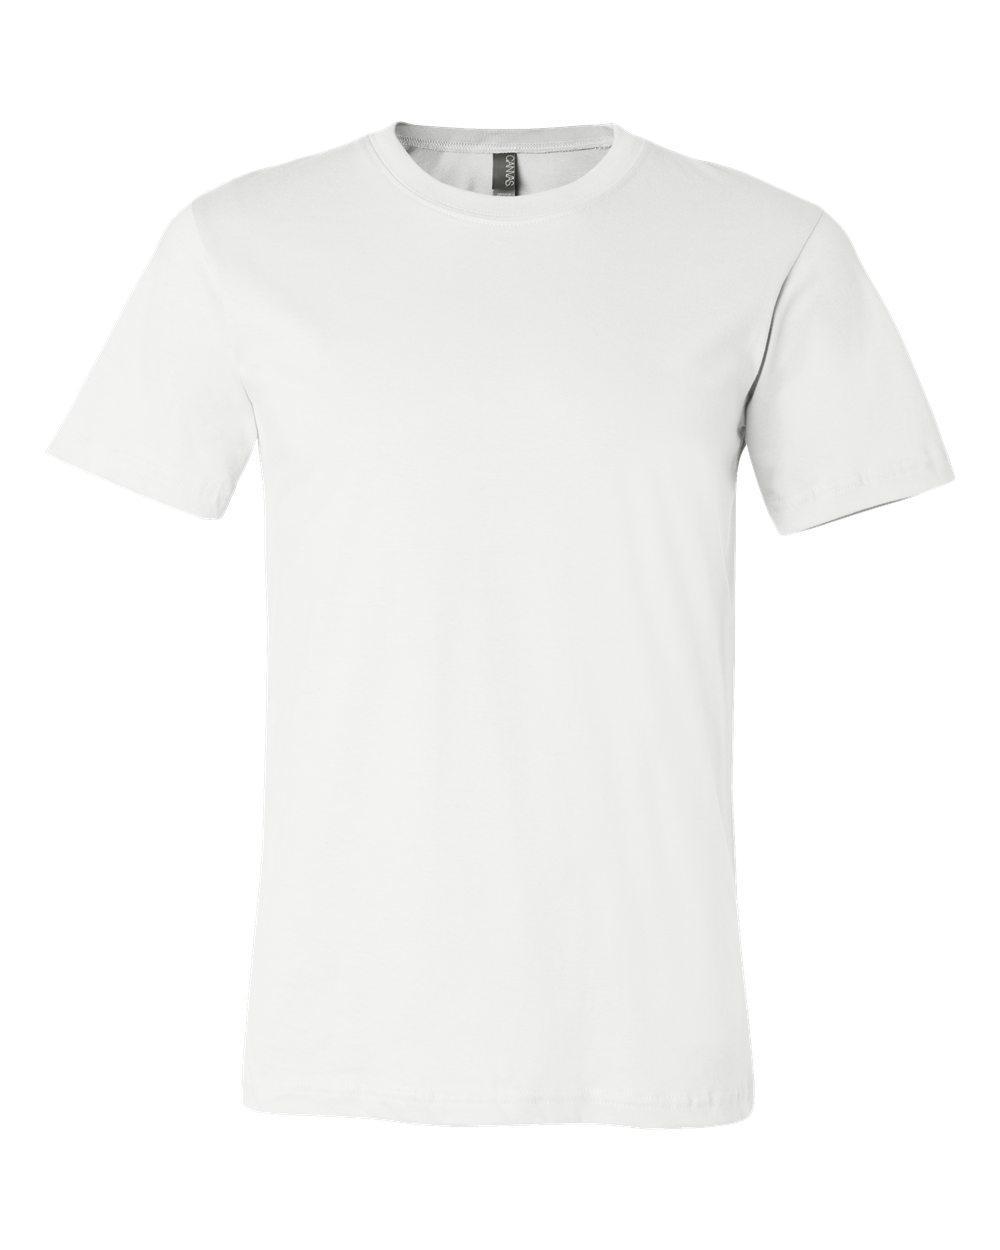 Blank Bella + Canvas T-Shirt - Constantly Create Shop